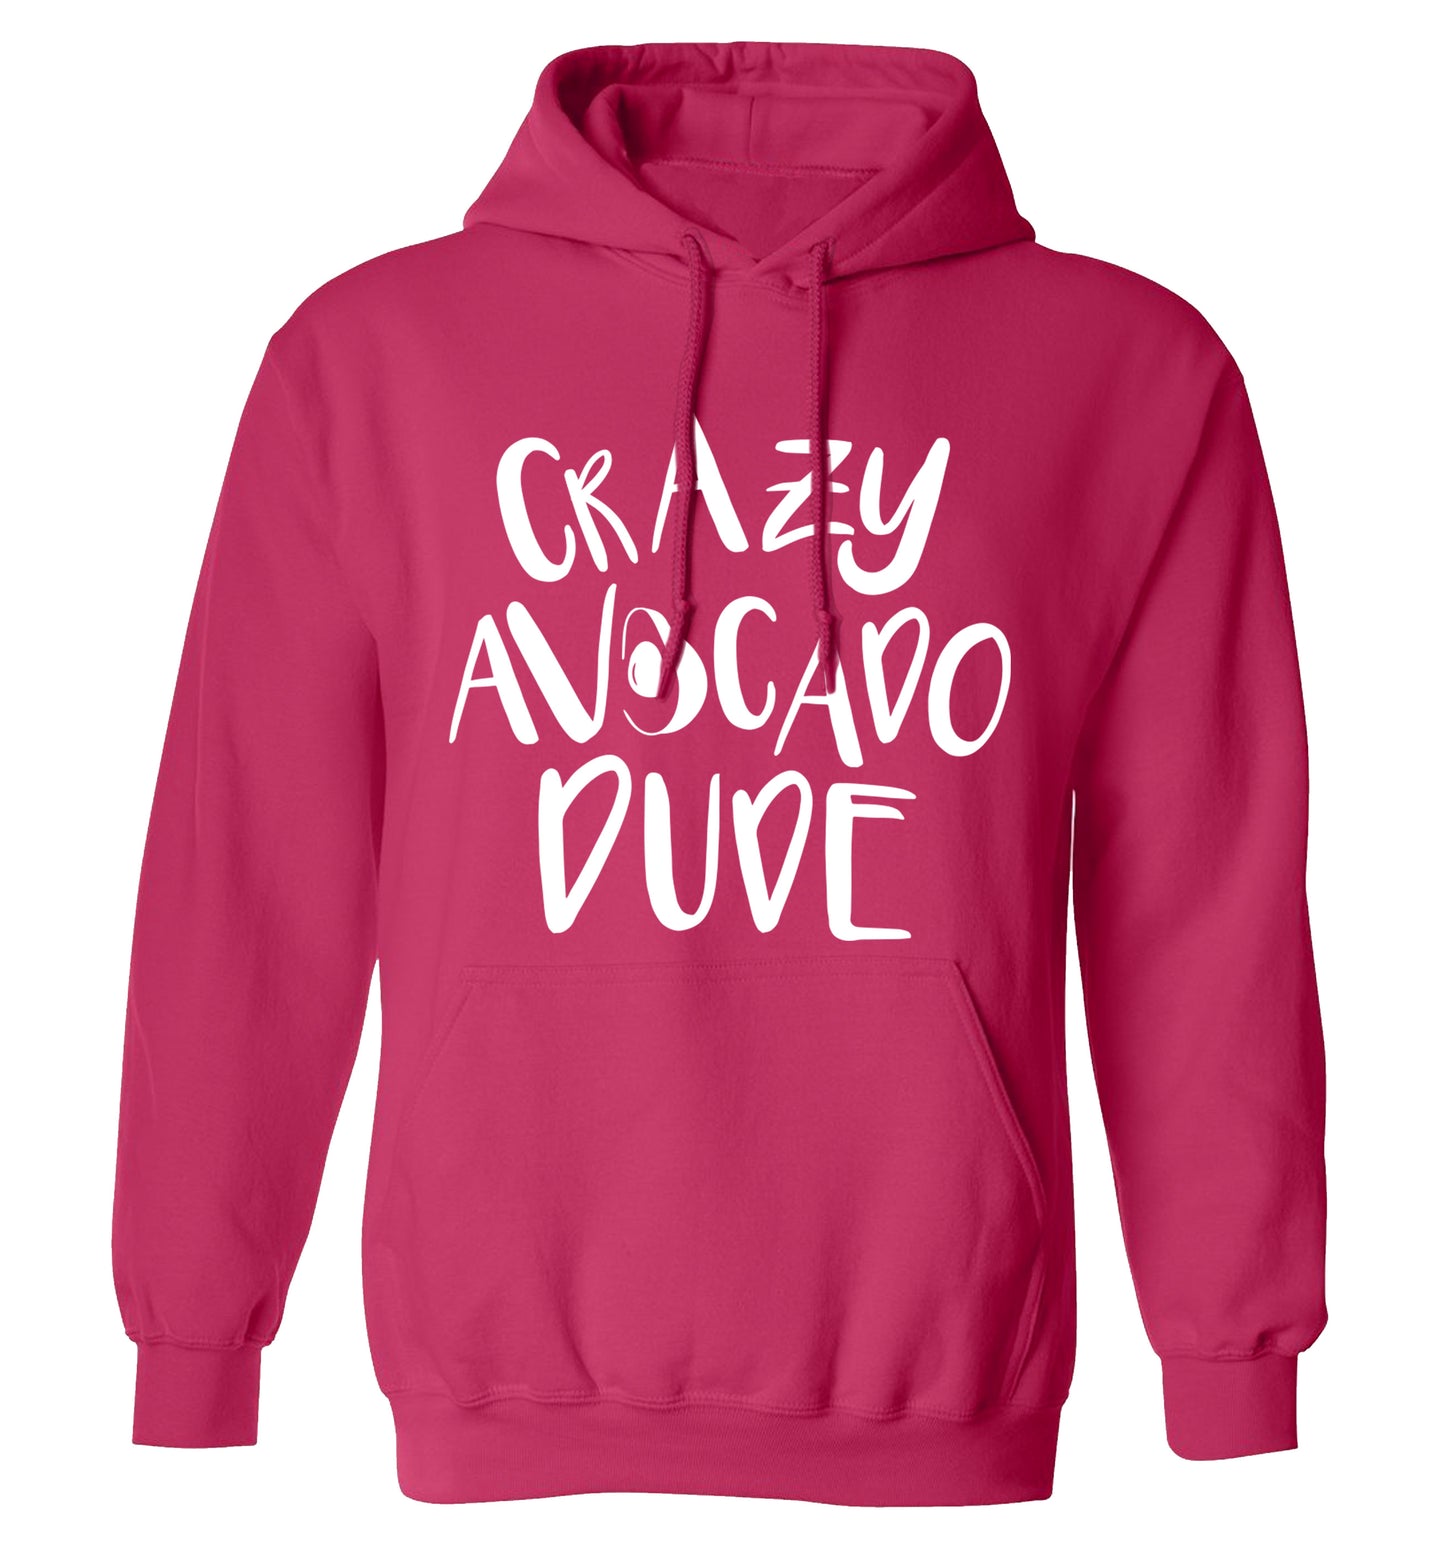 Crazy avocado dude adults unisex pink hoodie 2XL